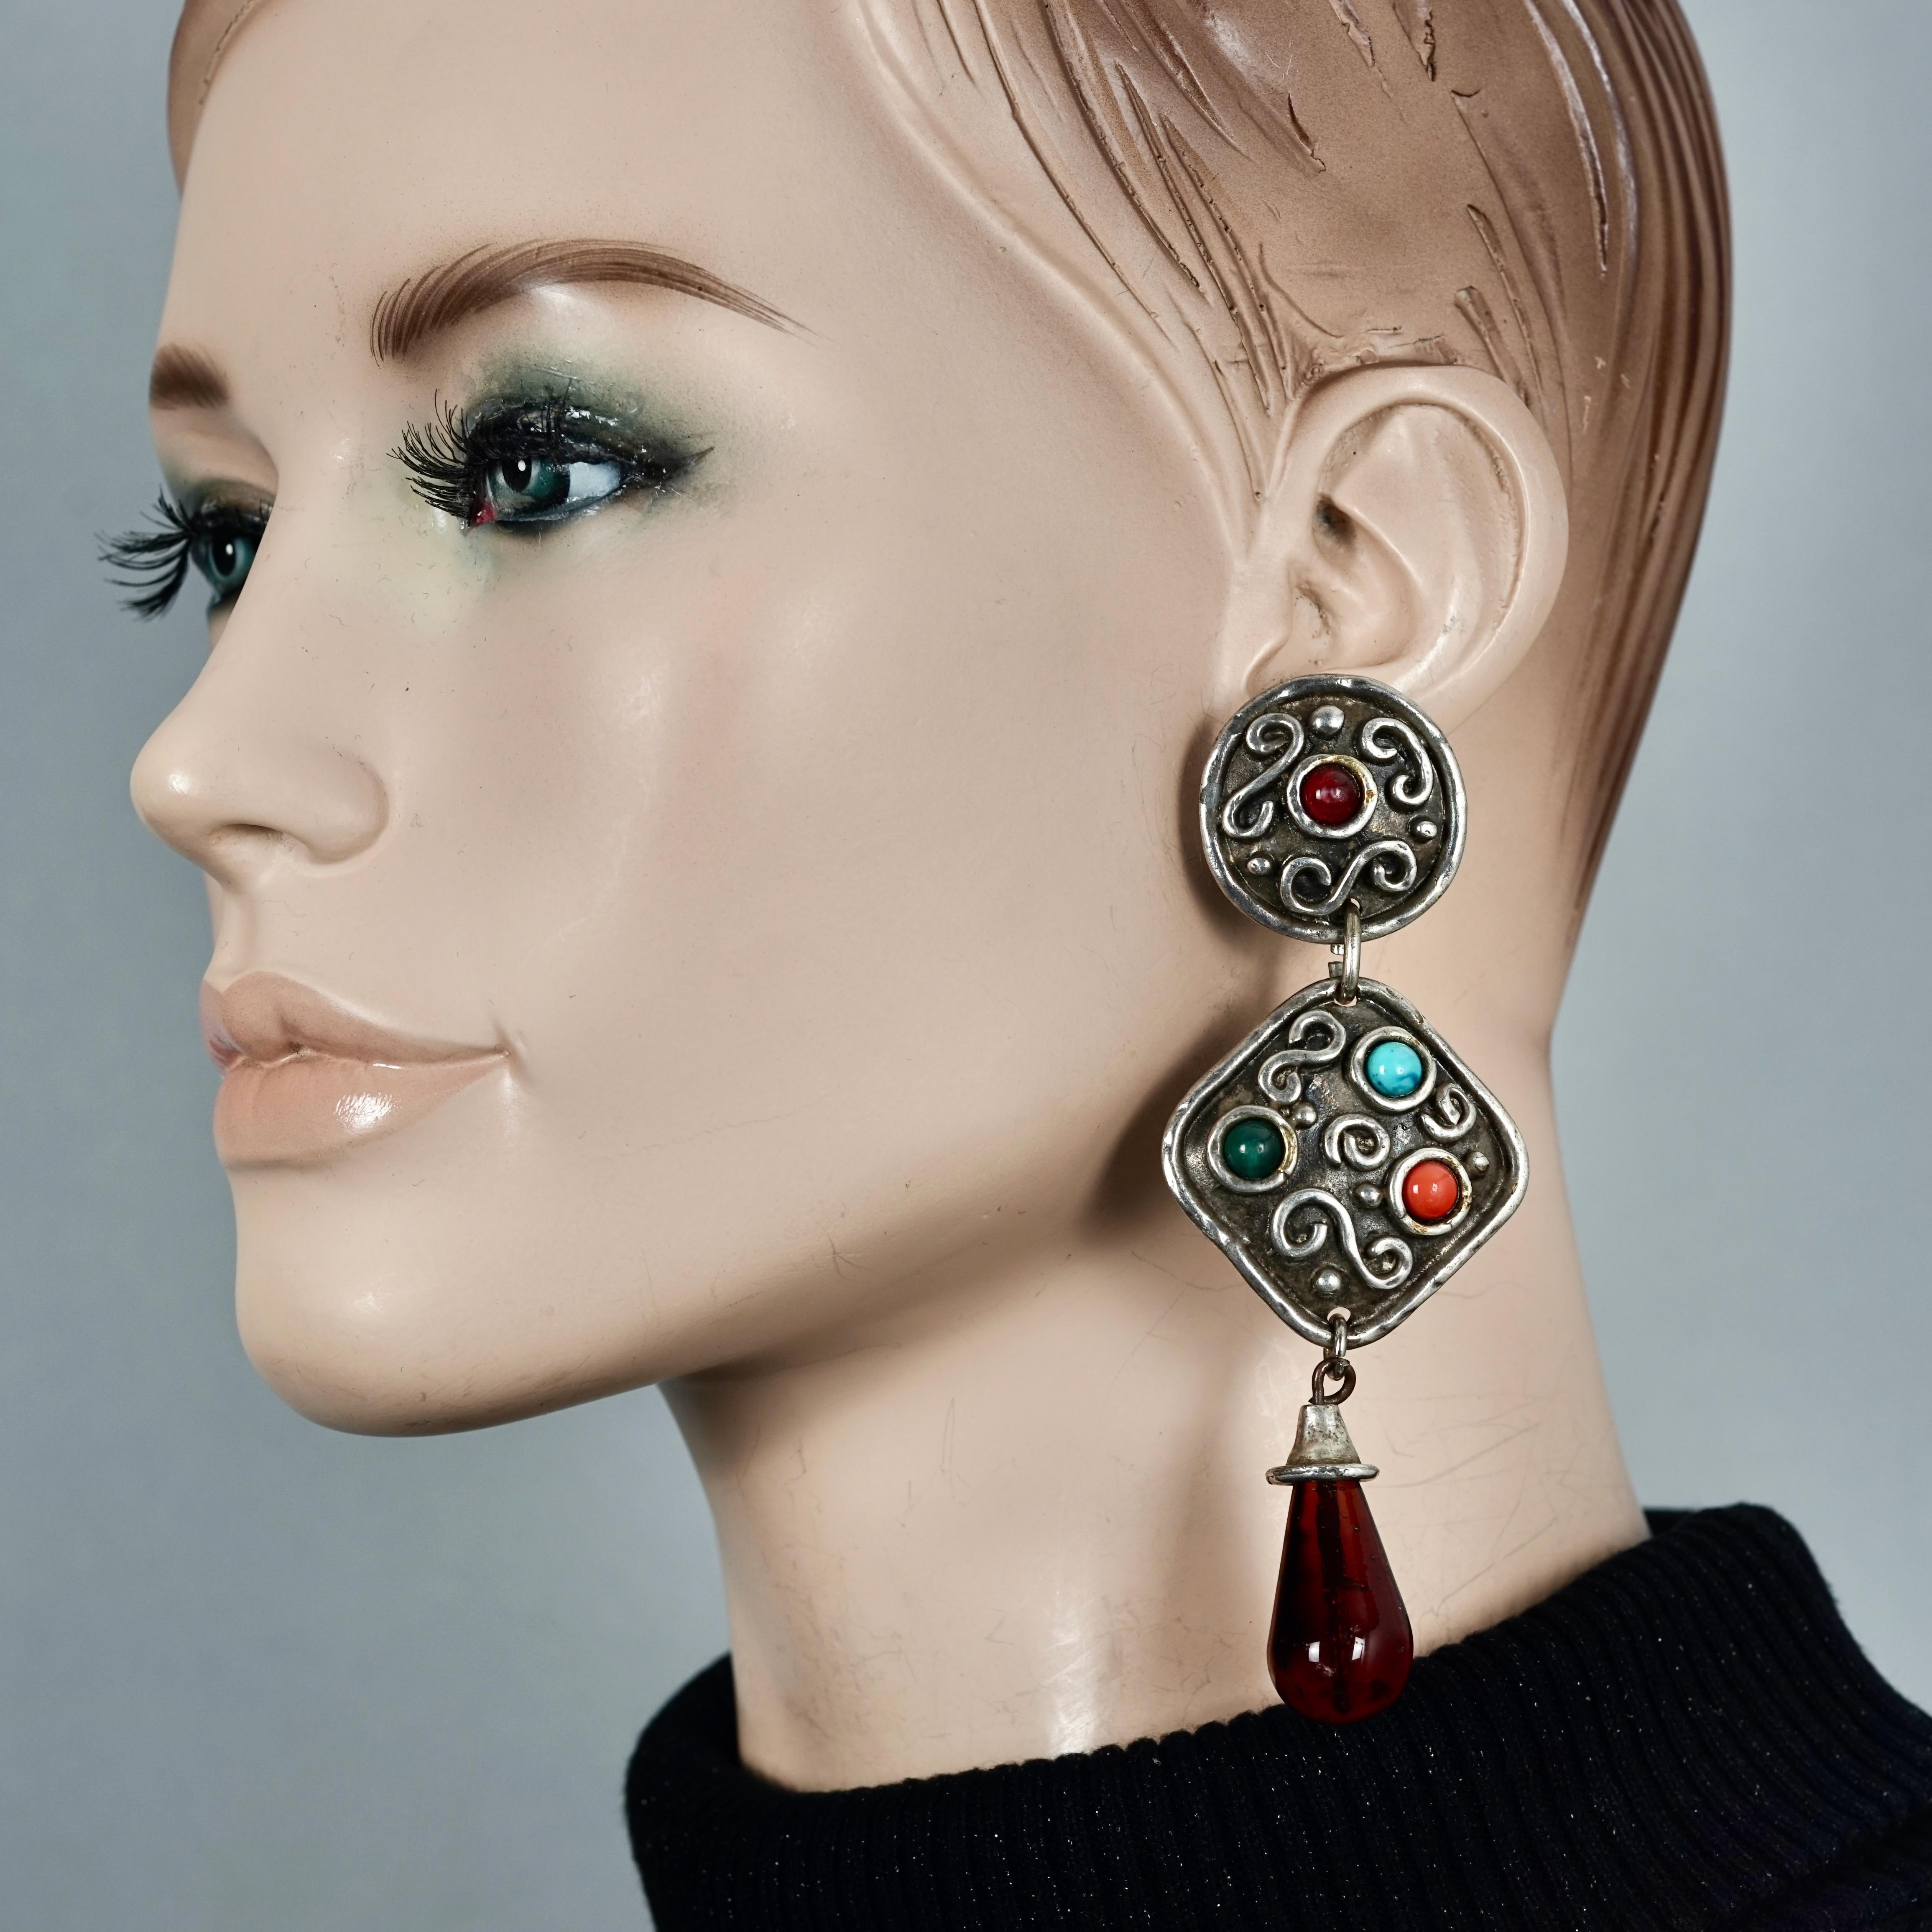 Vintage EDOUARD RAMBAUD Geometric Ethnic Dangling Earrings

Measurements:
Height: 4.33 inches (11 cm)
Width: 1.57 inches (4 cm)
Weight: 34 grams

Features:
- 100% Authentic EDOUARD RAMBAUD.
- Hammered geometric earrings embellished with dangling red